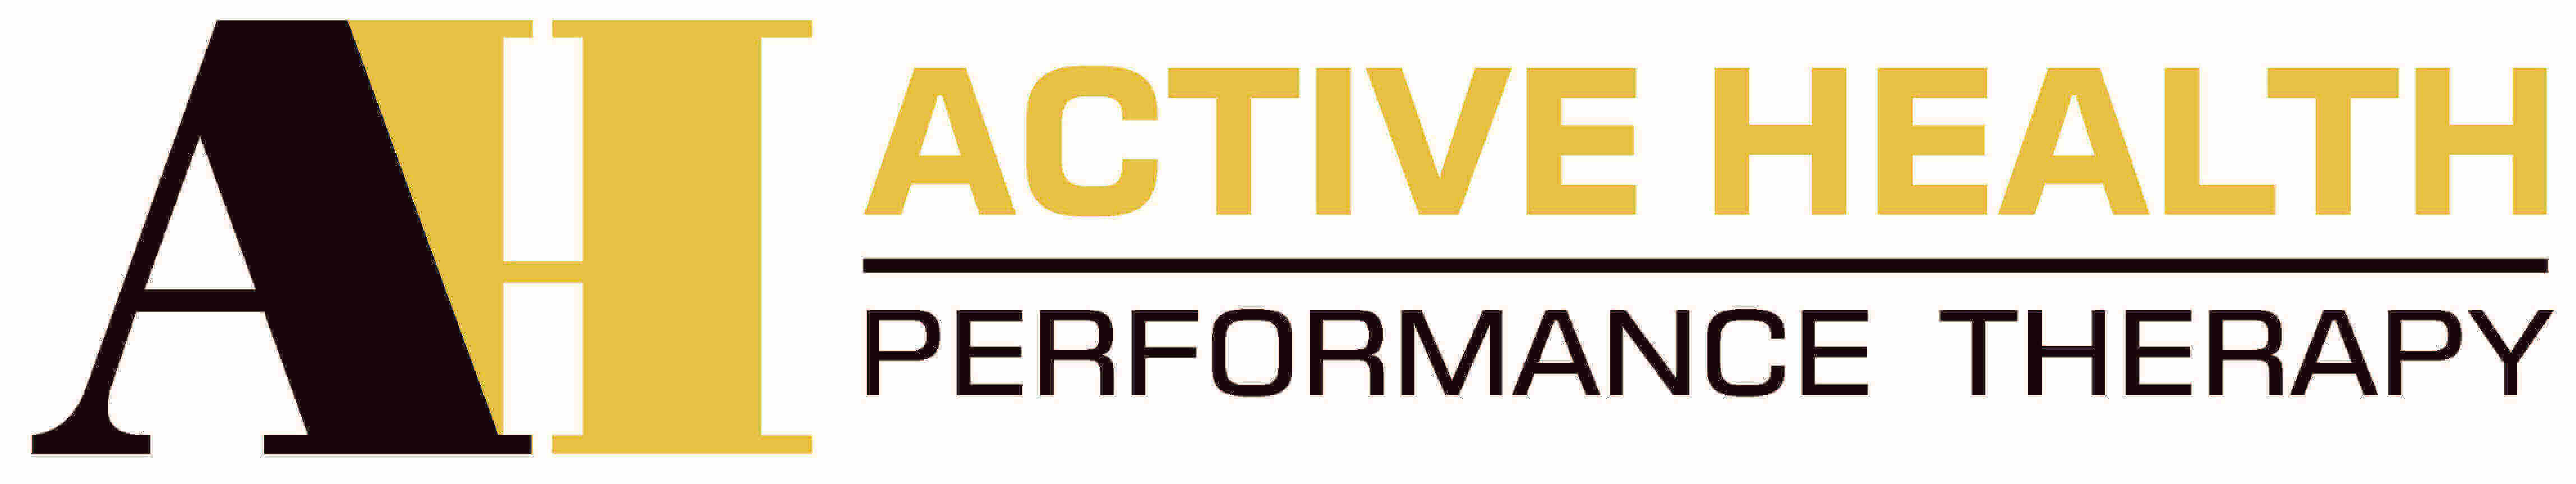 Active Health Performance Therapy